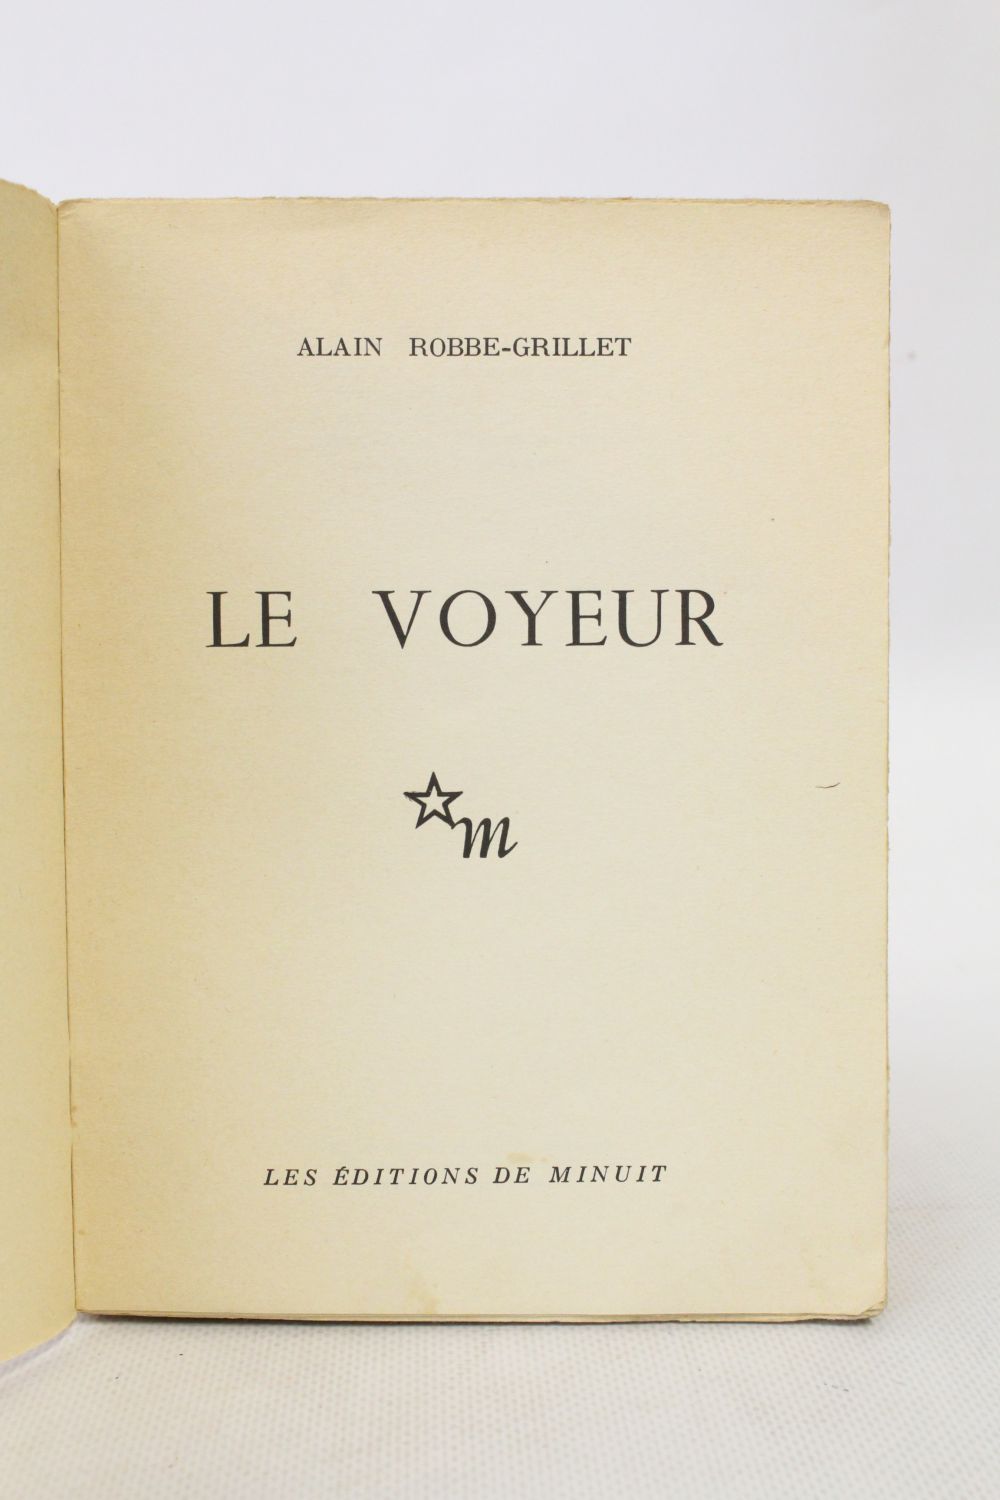 ROBBE-GRILLET Le voyeur - Signed book, First edition photo